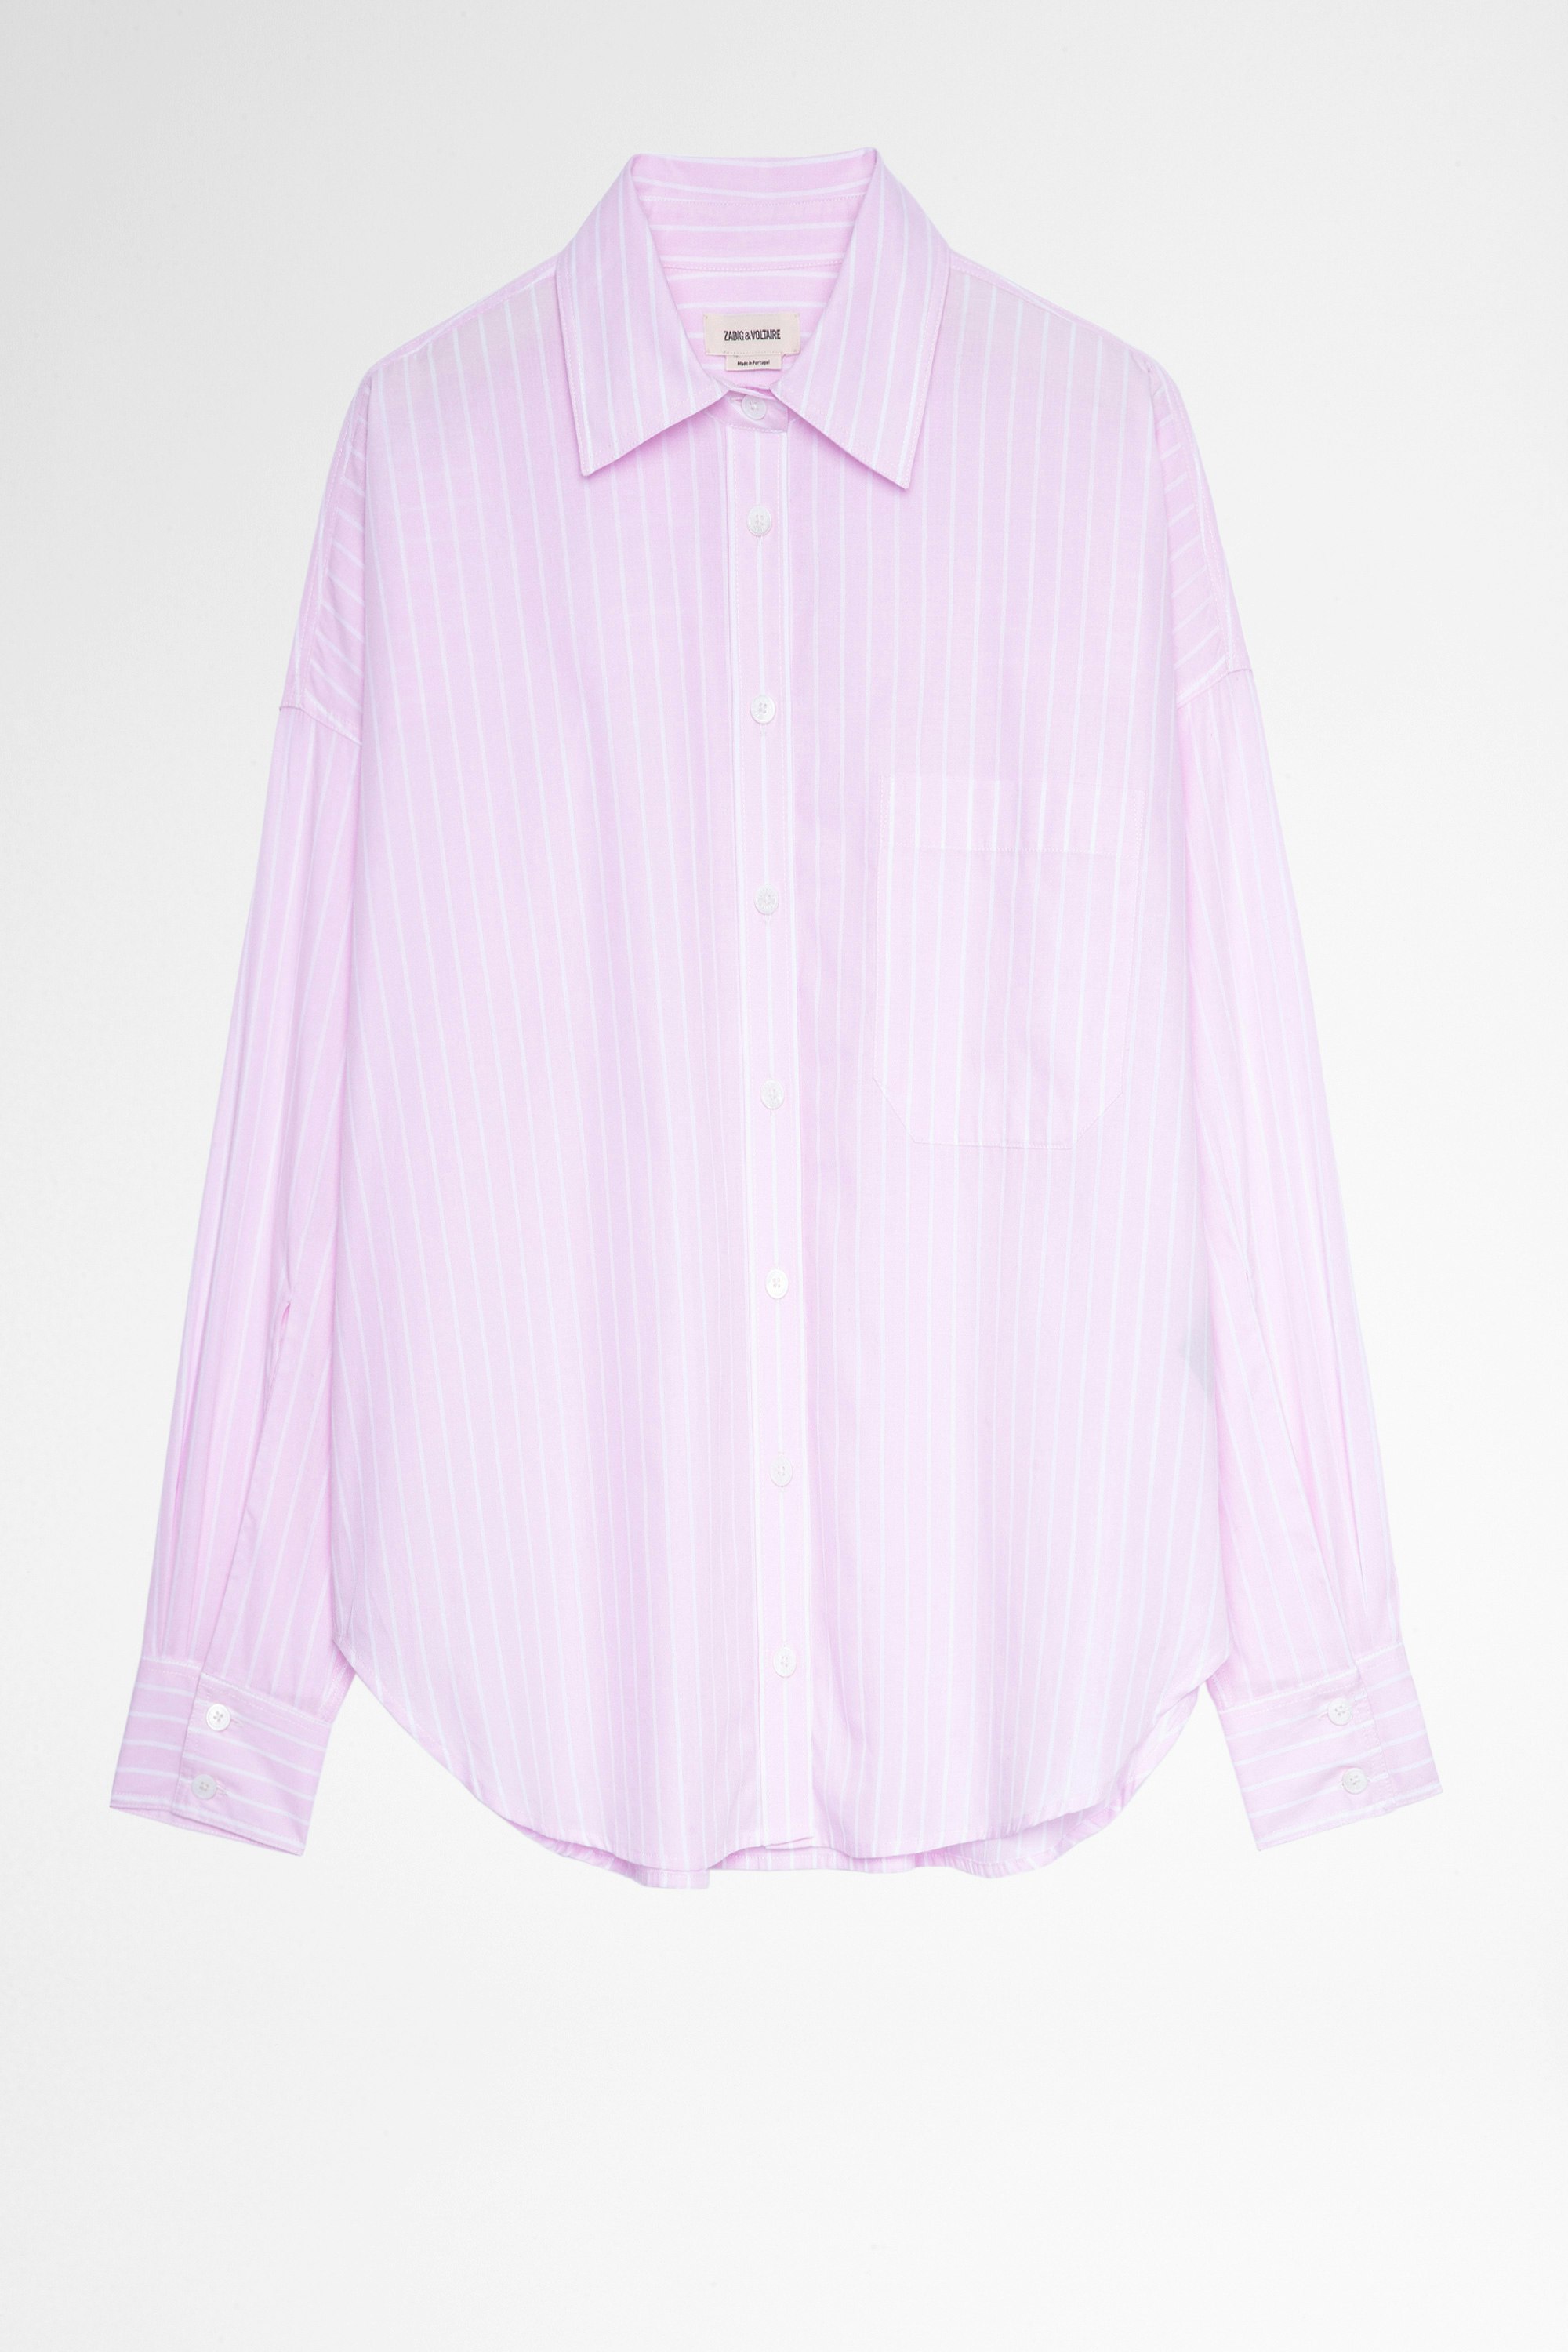 Tamara Shirt Pink striped cotton shirt with amour applique on the back. Made with fibers from organic farming.